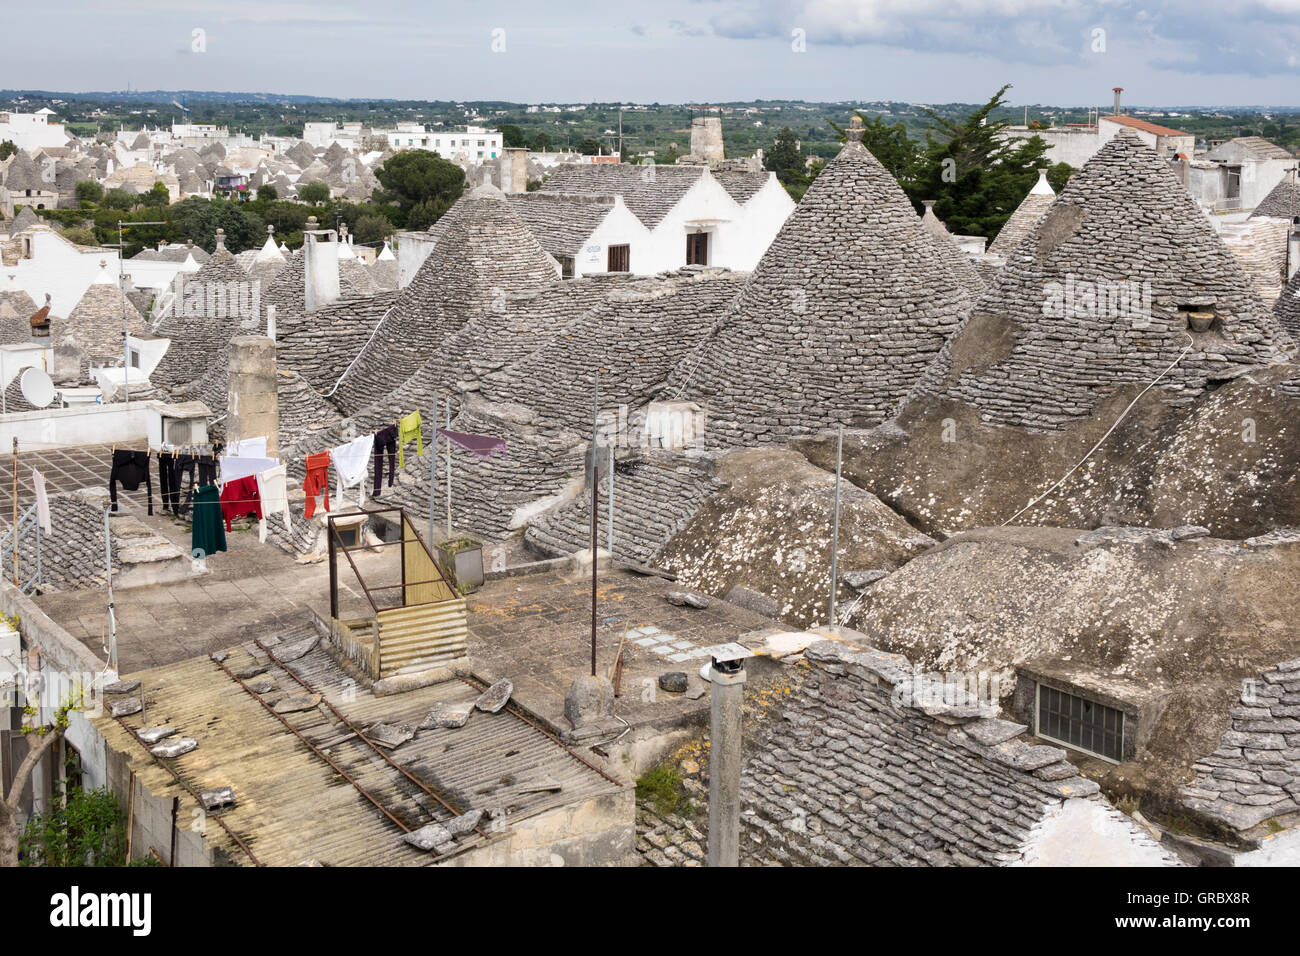 Trulli With Roofgarden In The Foreground, Modern Part Of The City In The Background.Alberobello, Province Bari, Apulia, Italy Stock Photo